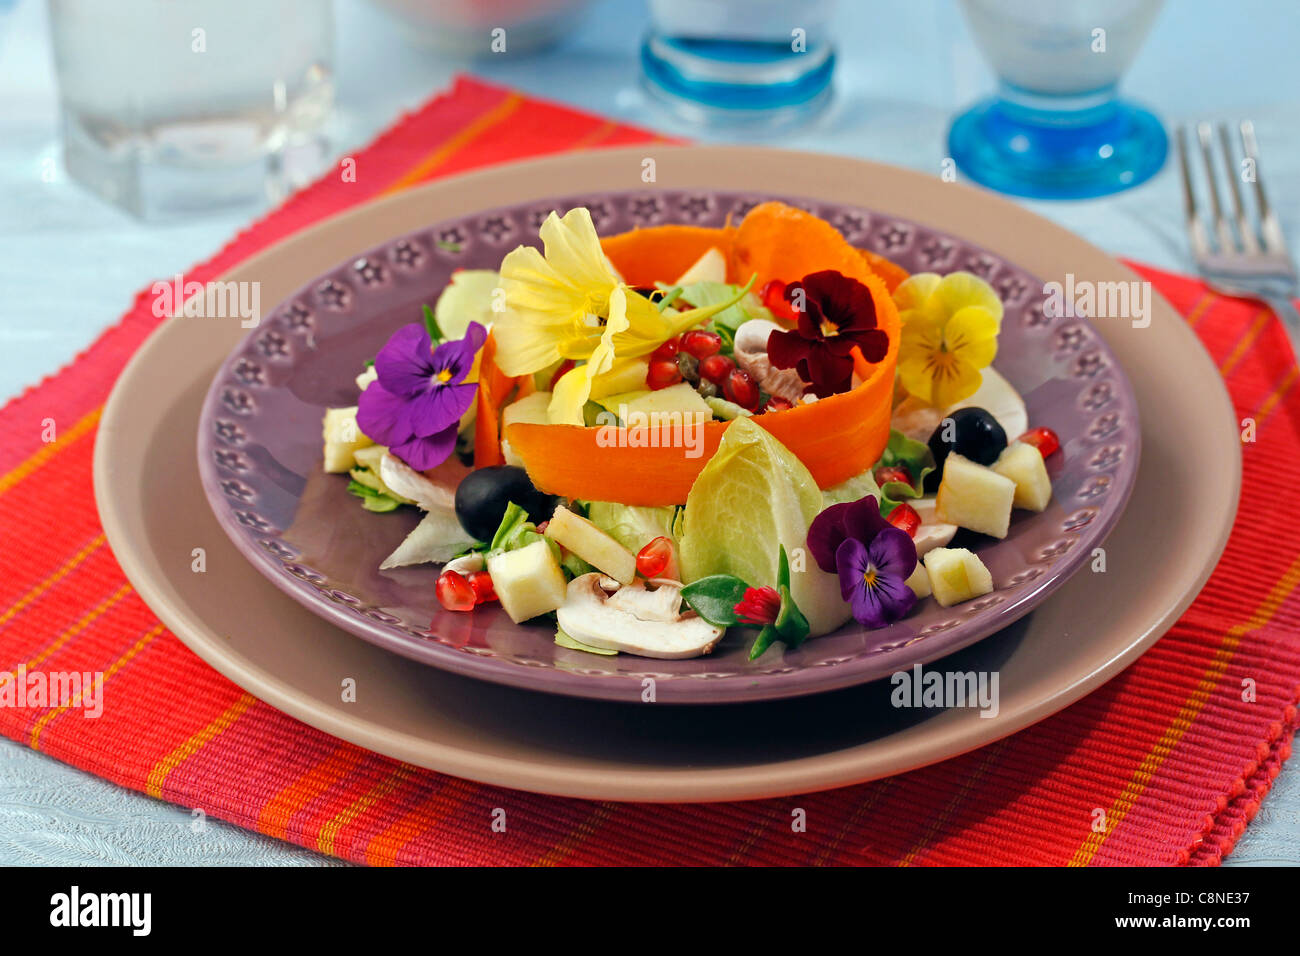 Salad with pomegranate and mushrooms. Recipe available. Stock Photo